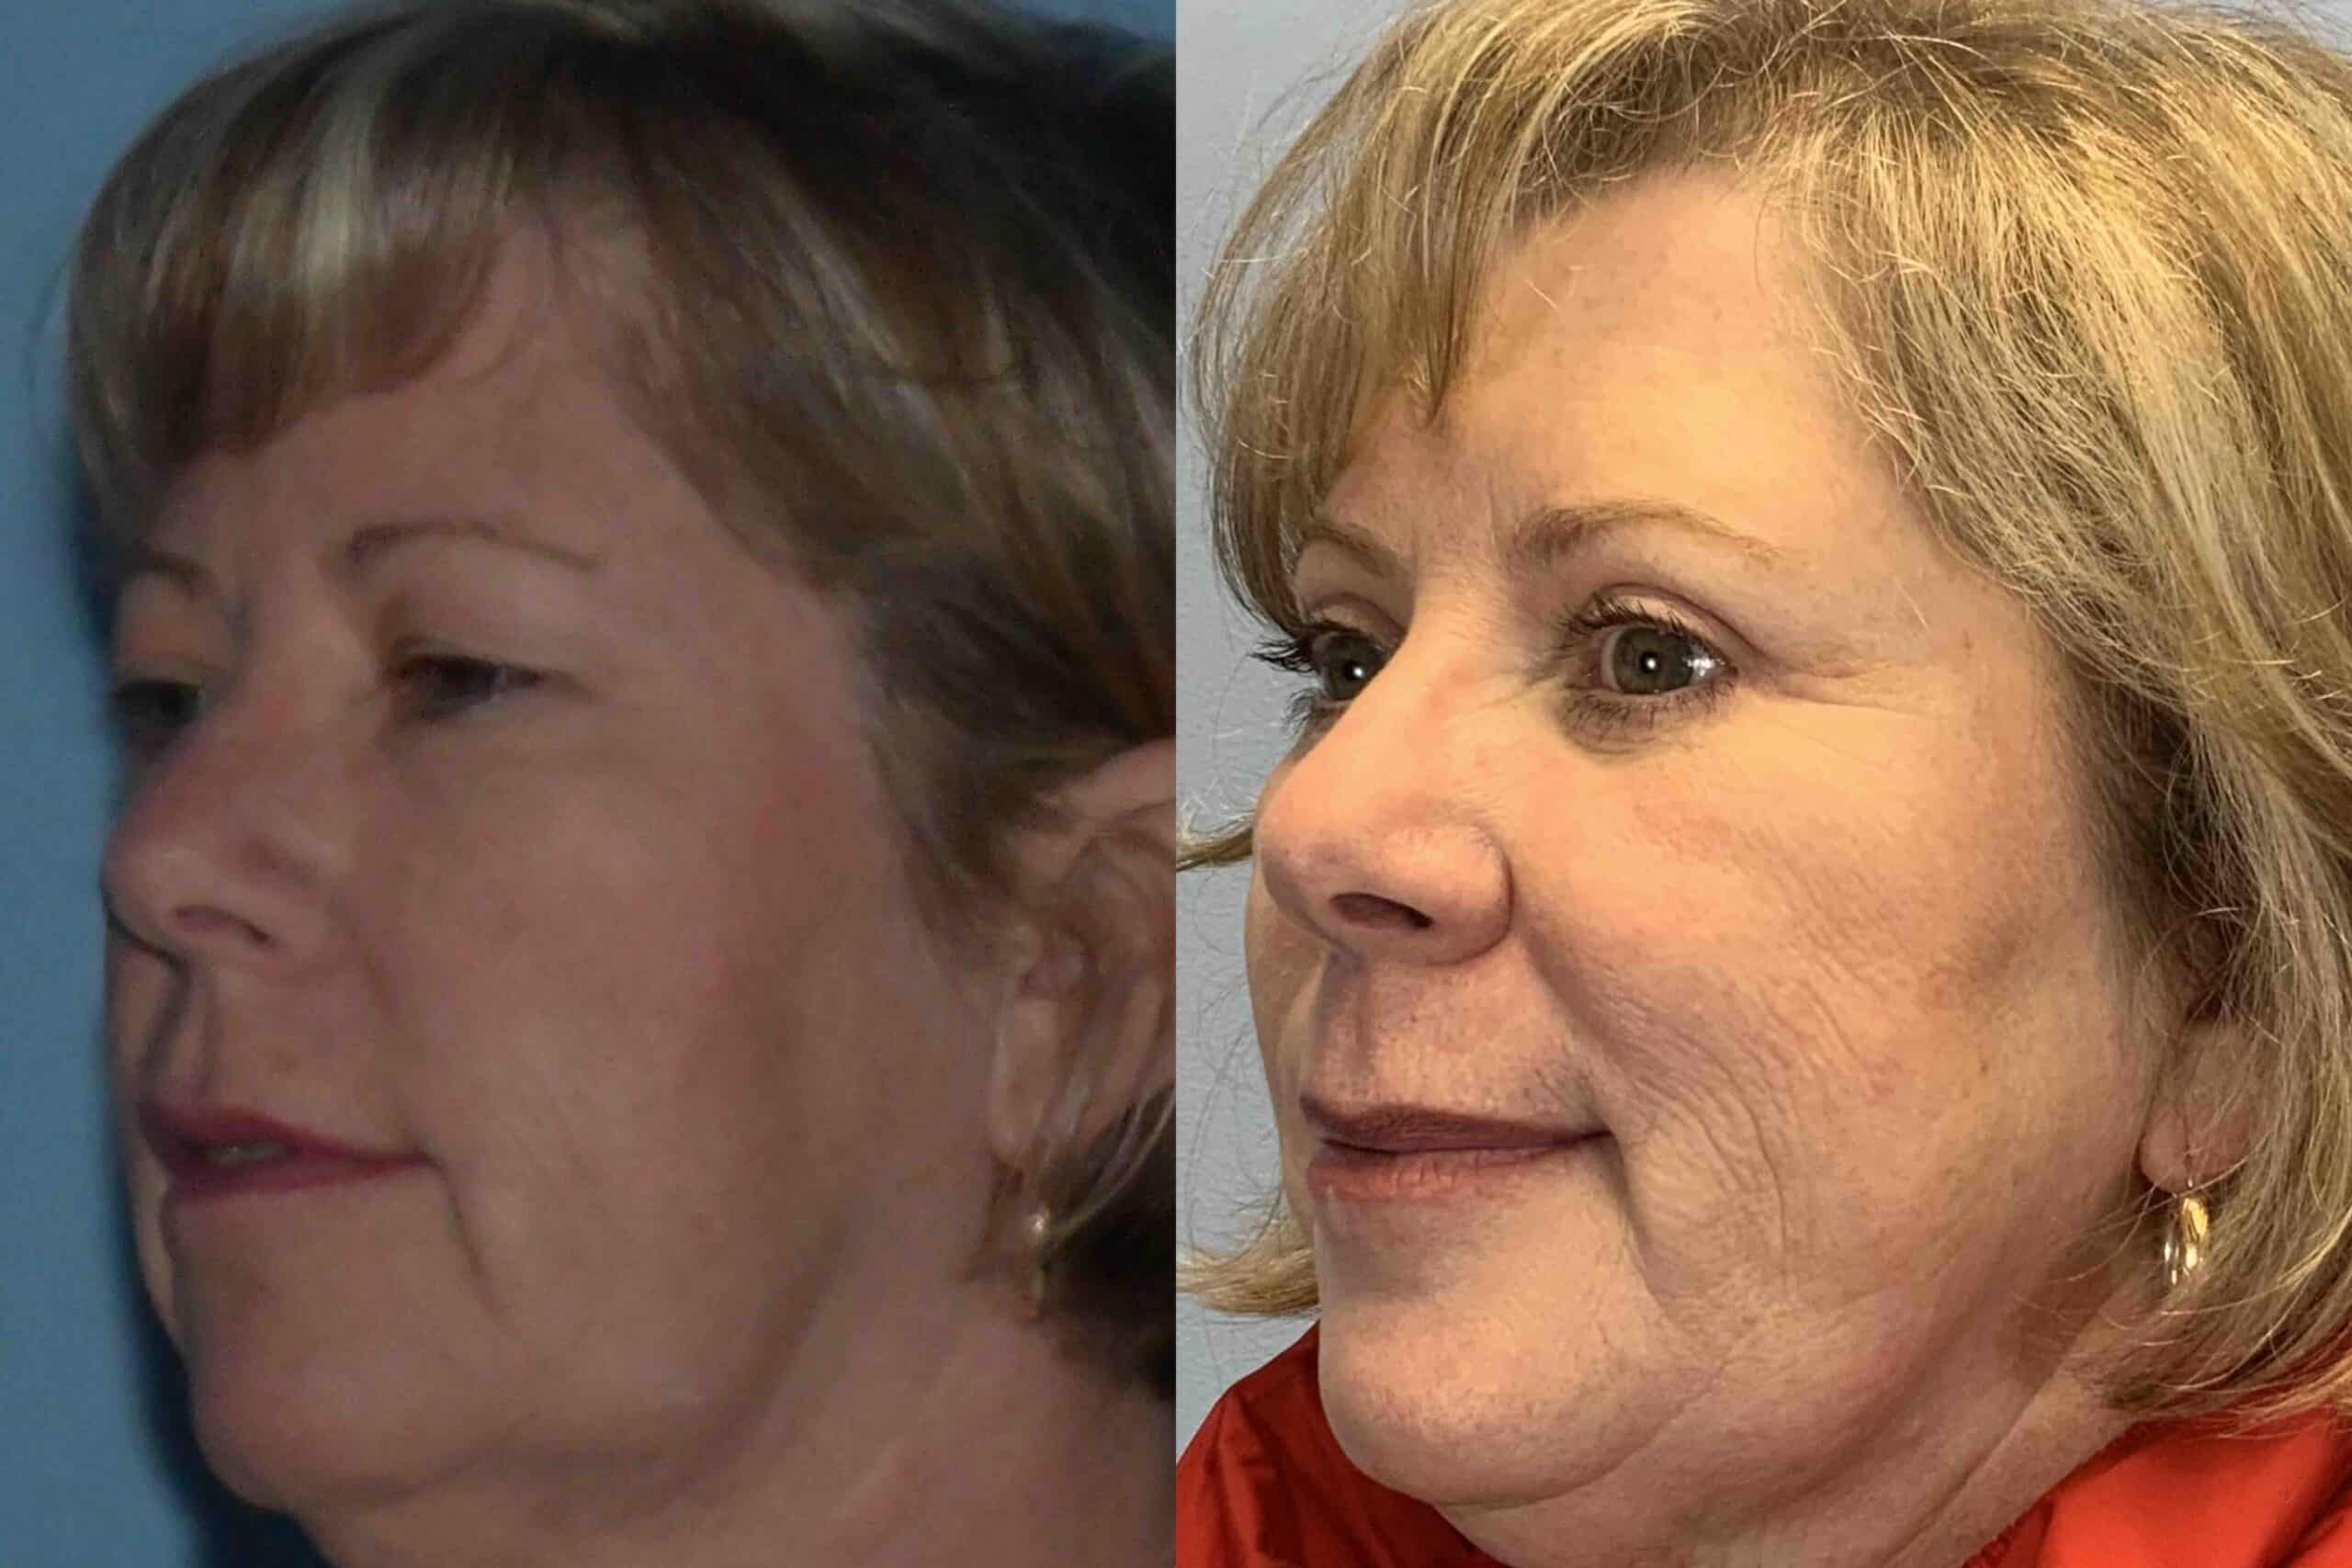 Before and after, 3 mo post op from Upper and Lower Blepharoplasty, Canthopexy (side view)